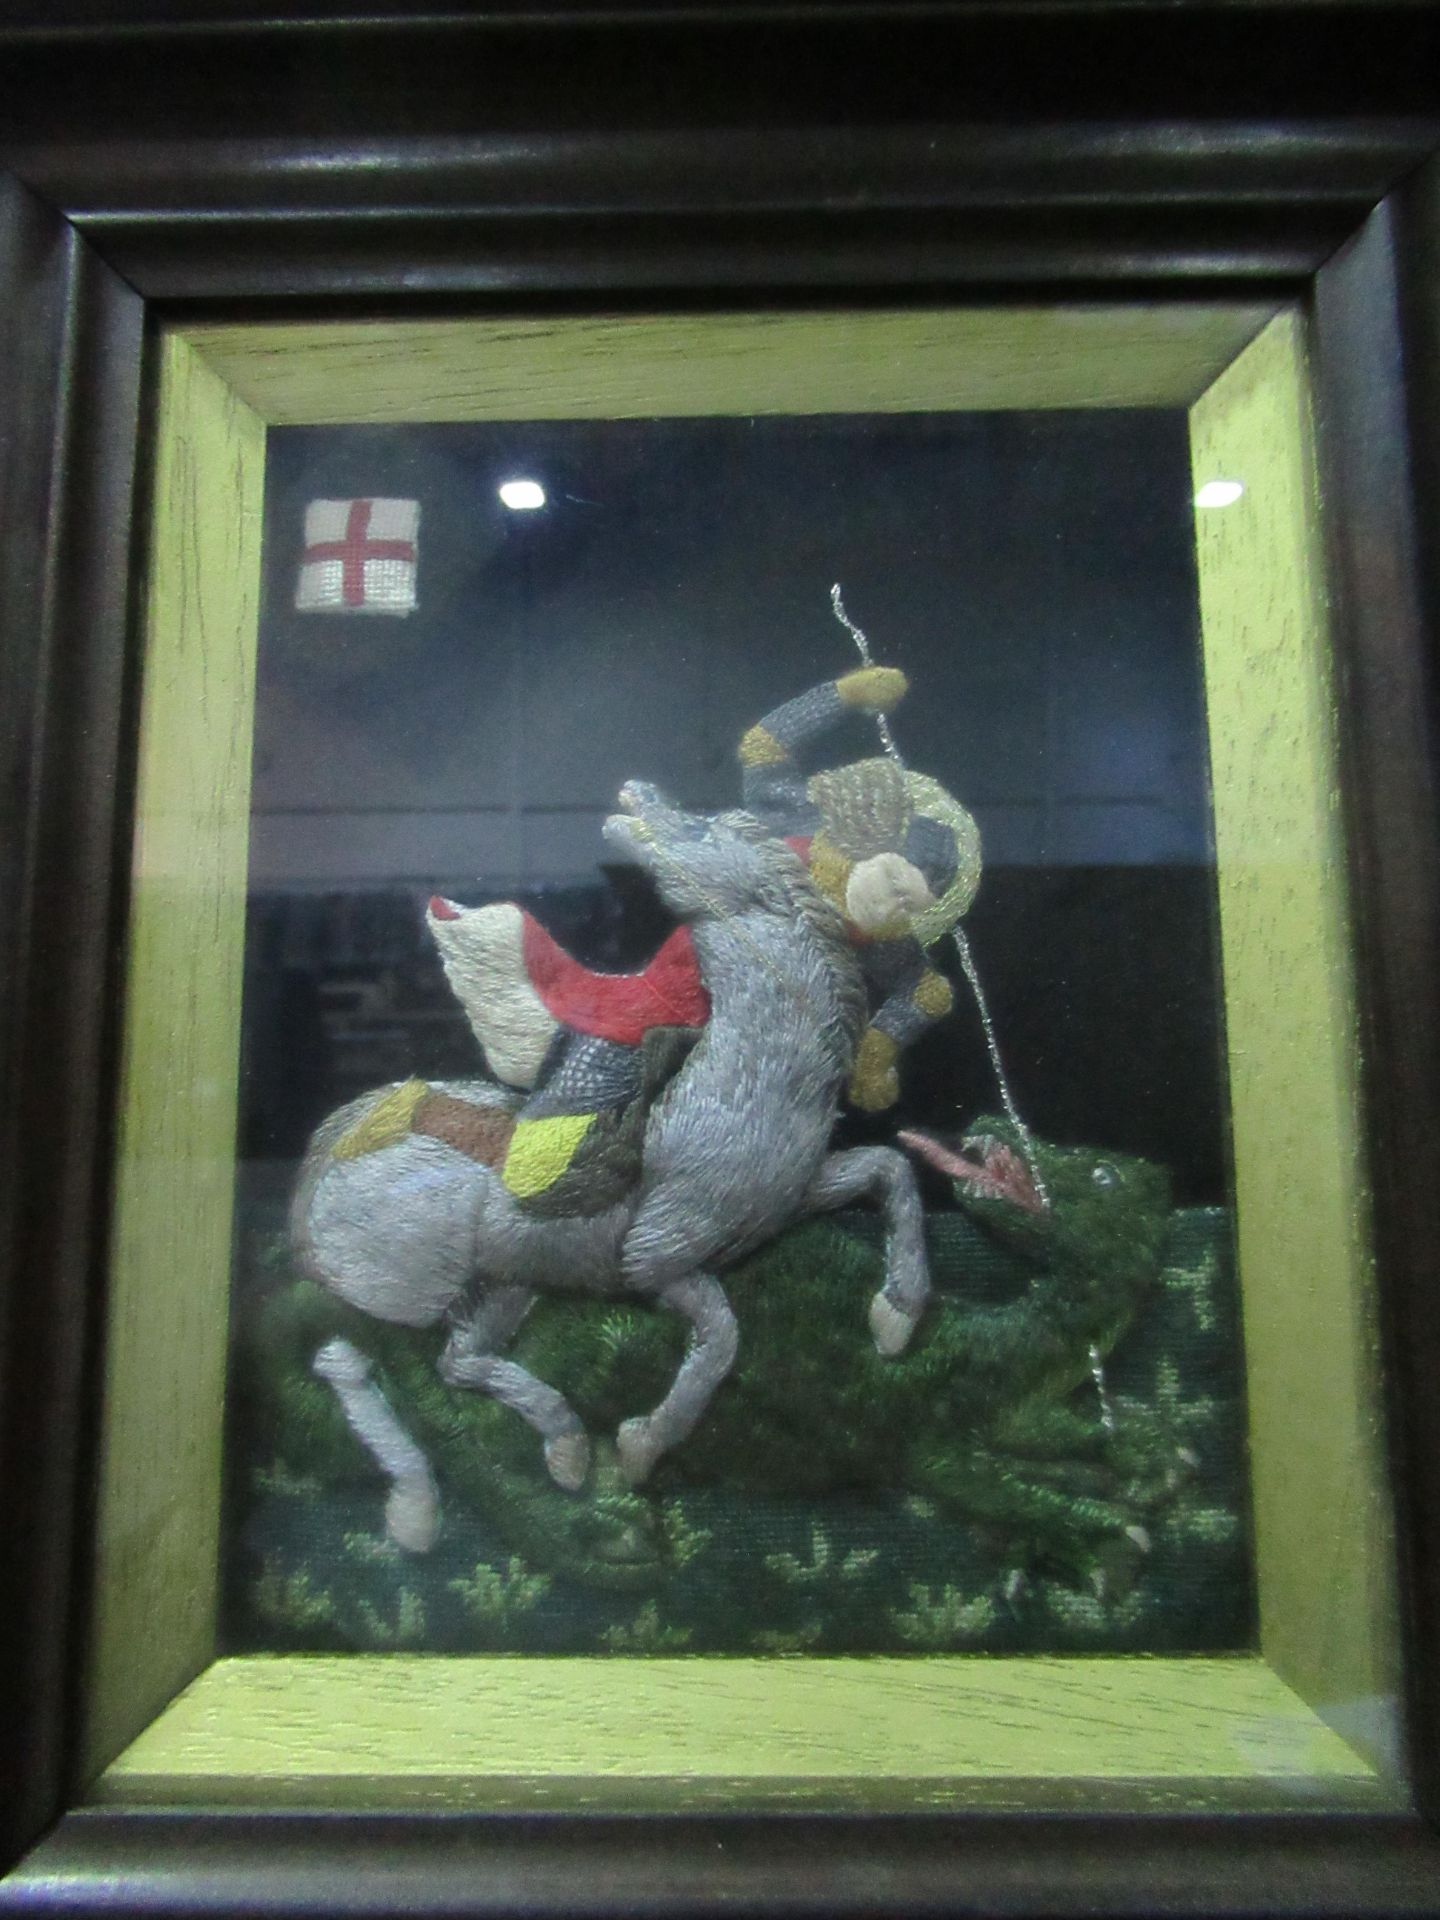 Stumpwork of 'St George Slaying the Dragon' by K. Hyslop (1992) (12 x 15cm) - Image 2 of 2